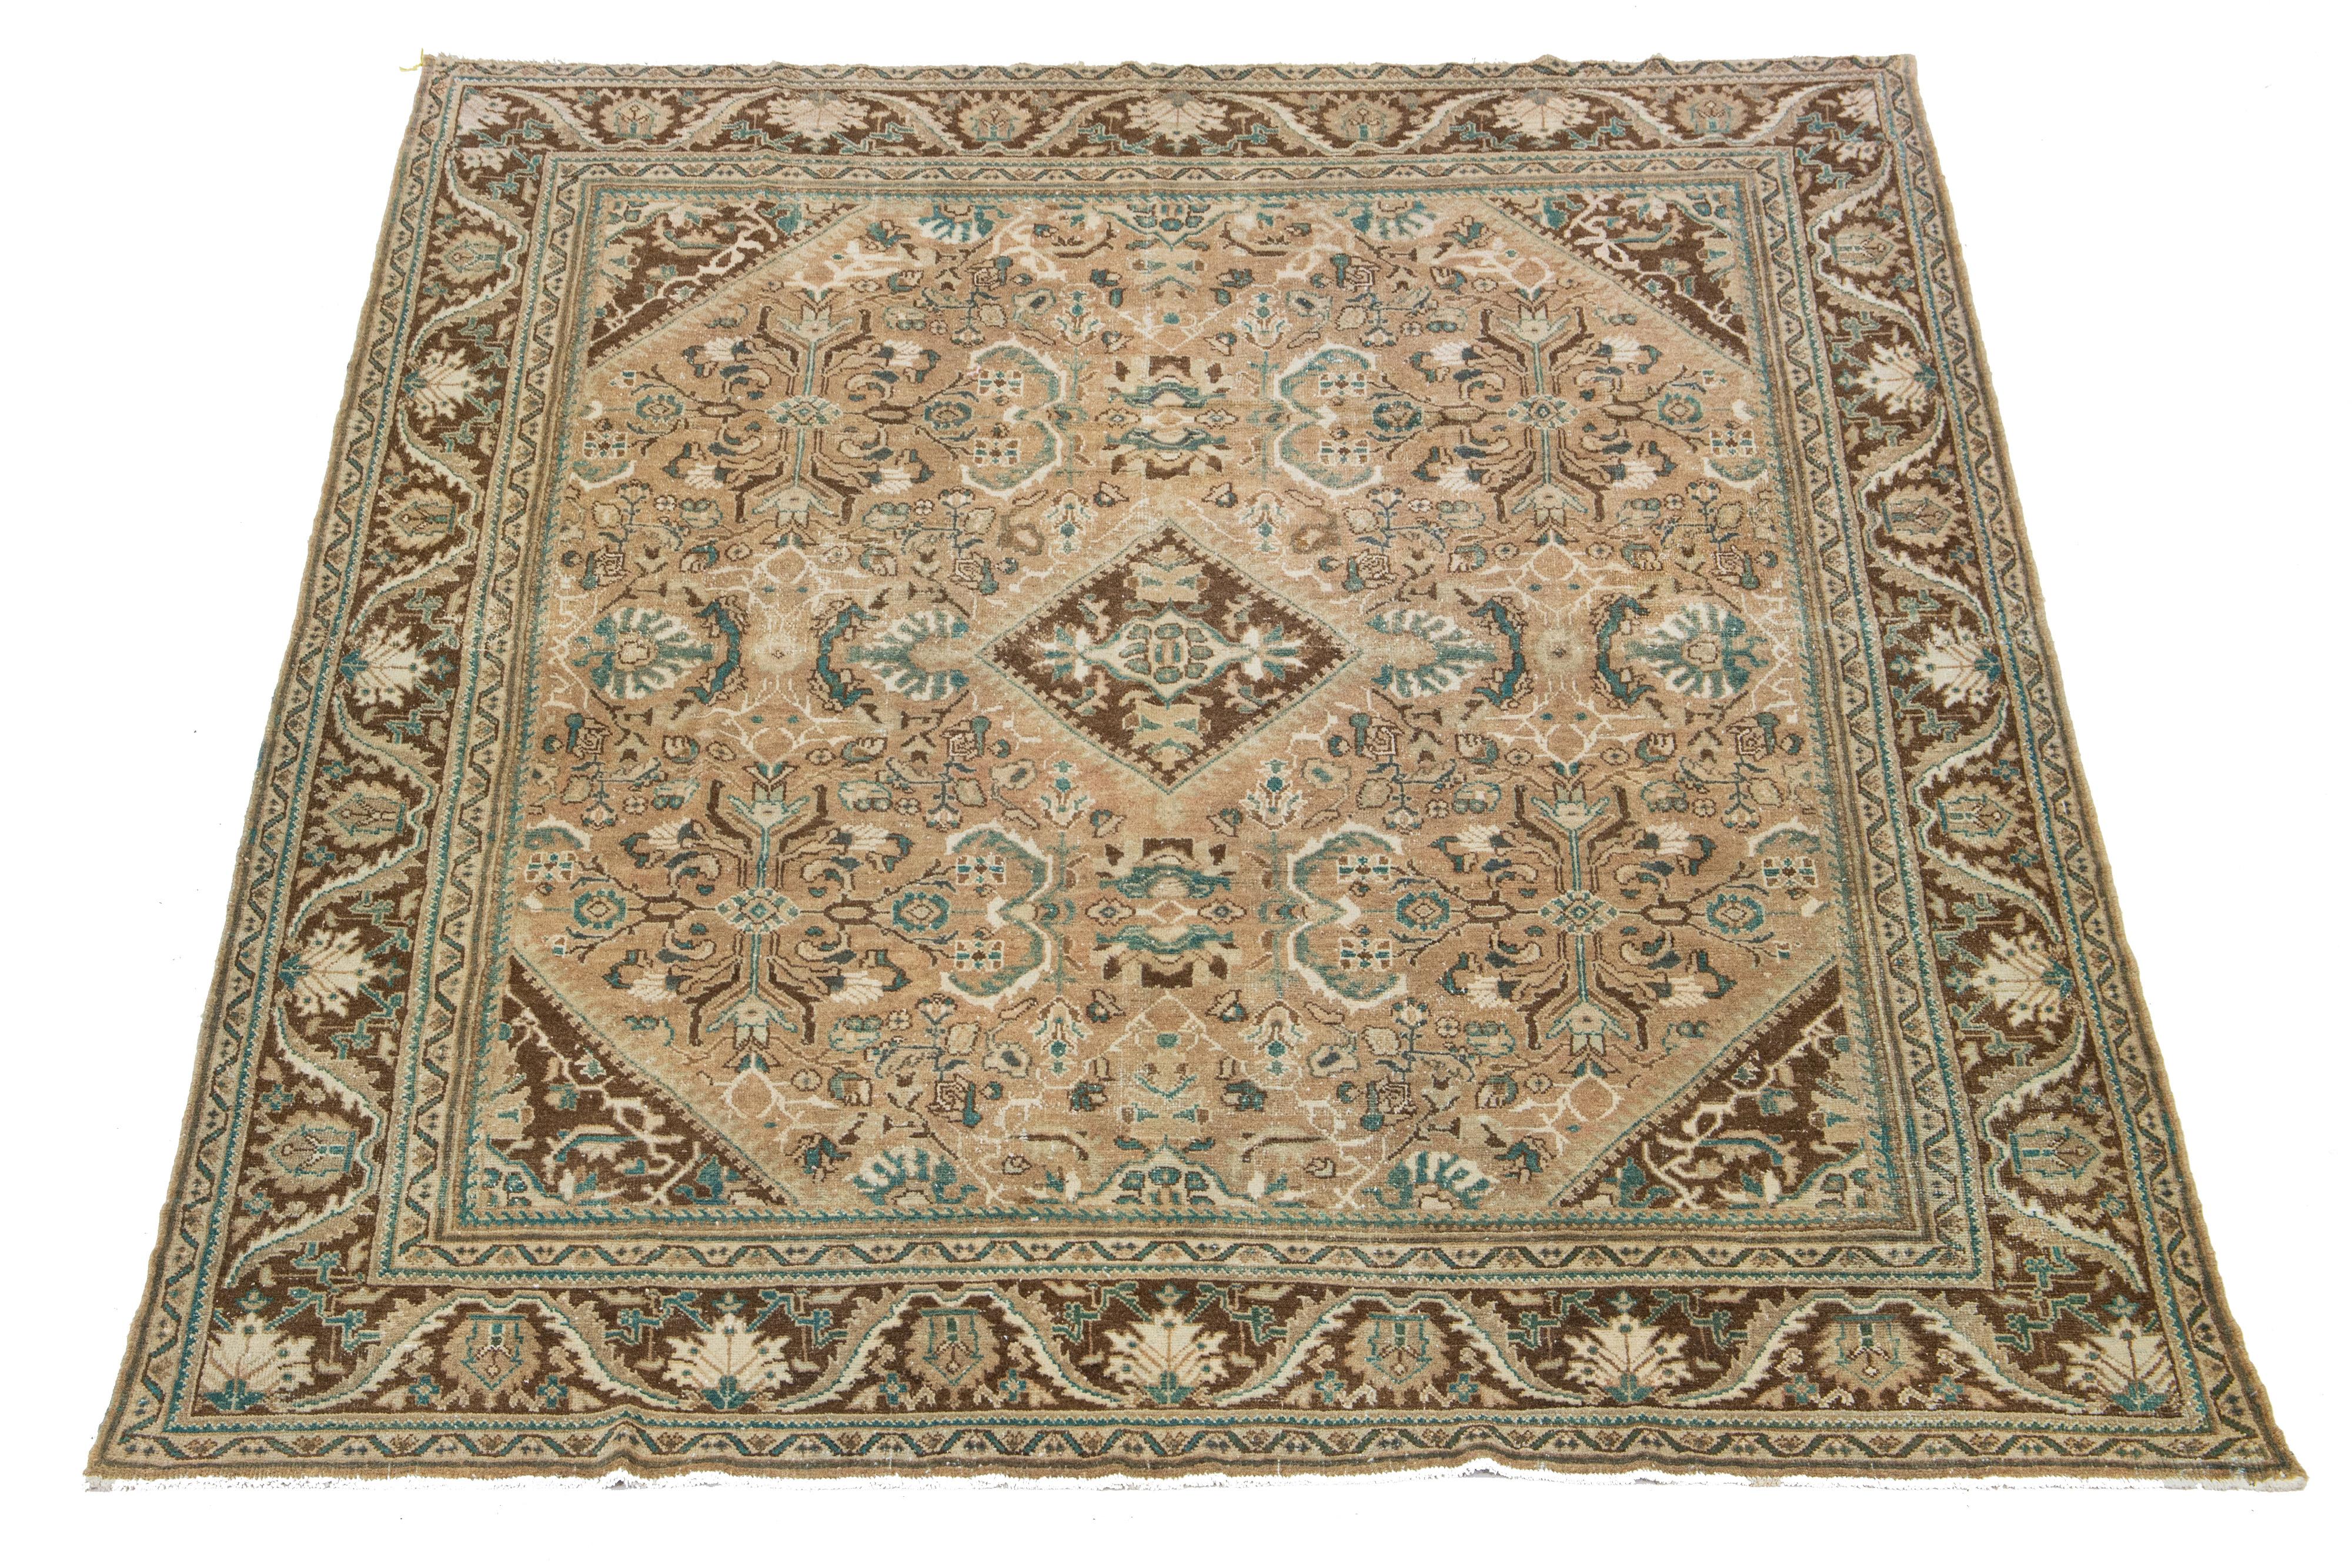 Beautiful Vintage Mahal hand-knotted wool rug with a brown color field. This Persian rug has classic blue and beige hues throughout the floral motif.

This rug measures 9'10